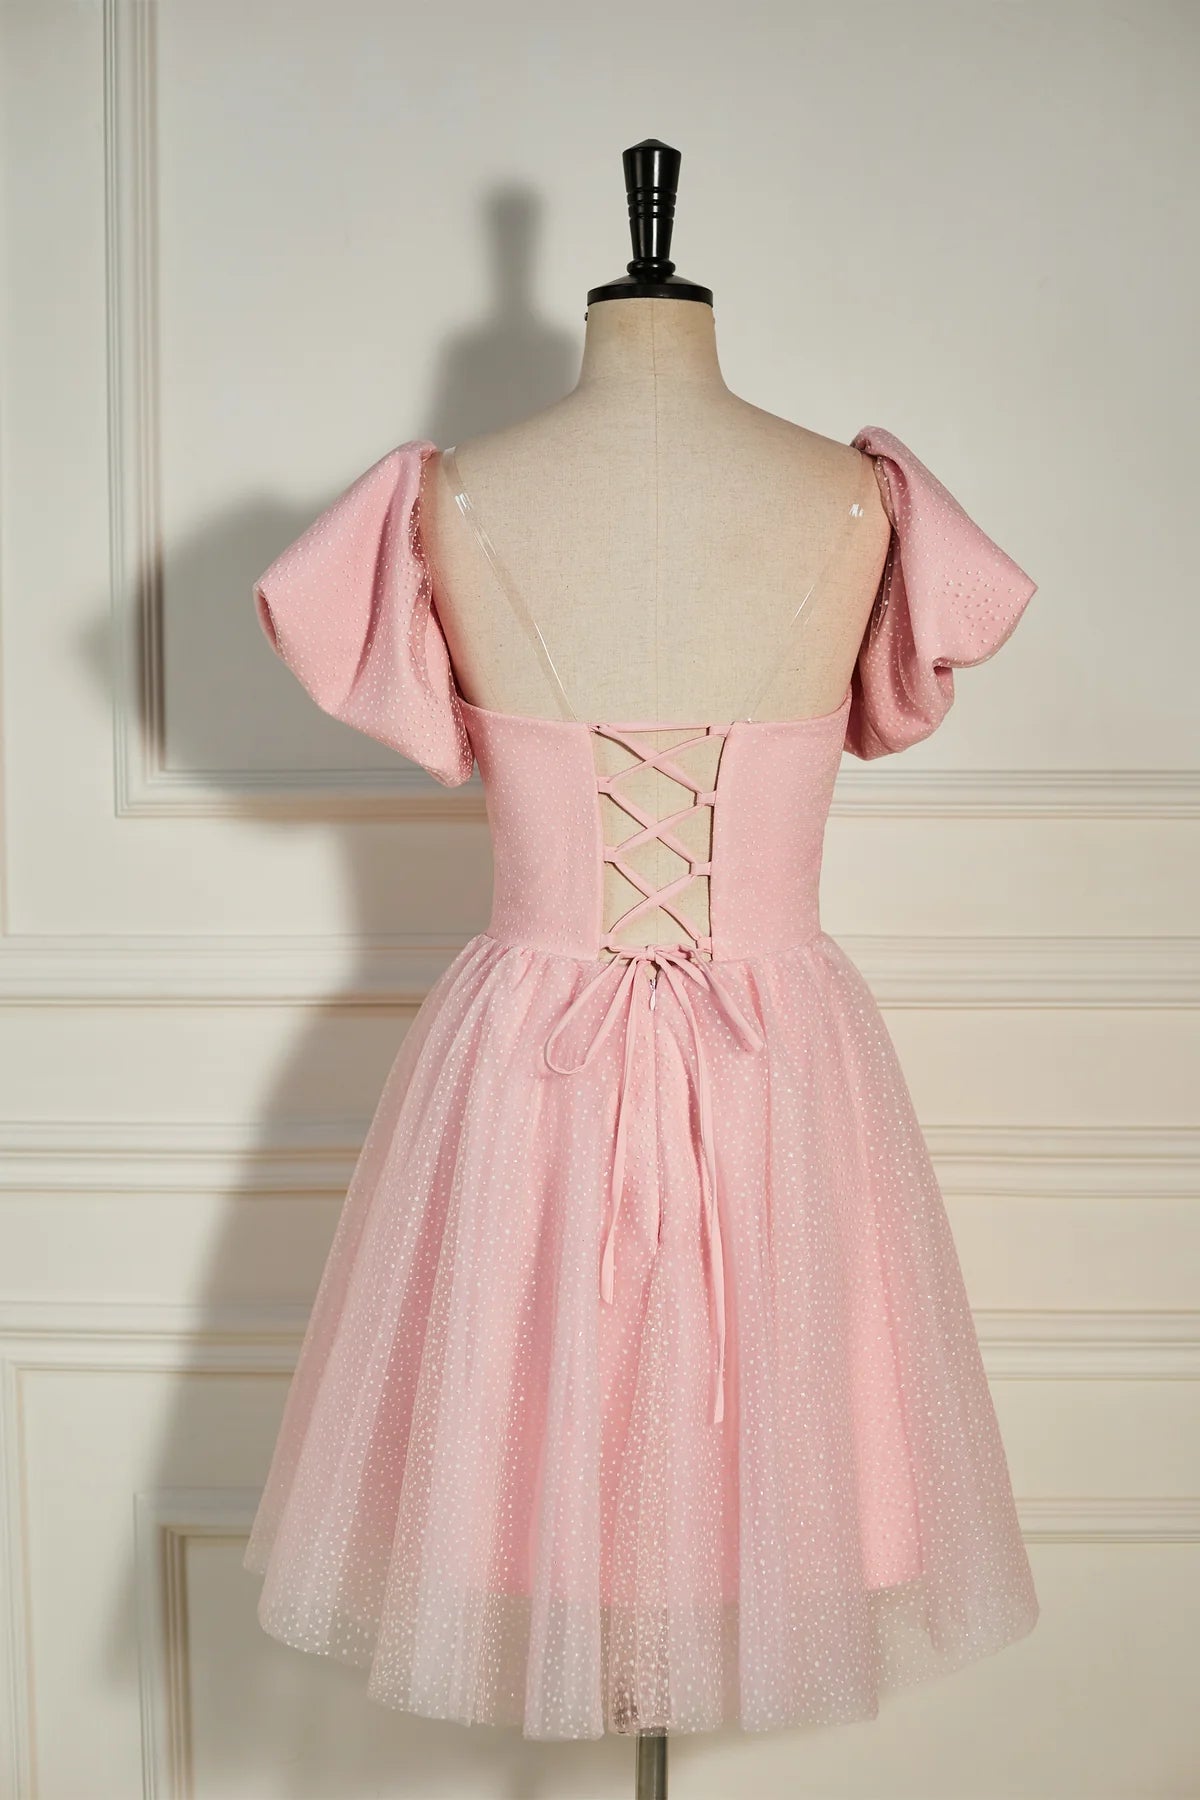 PM540,Pink Plunging V Neck Dot Lace-Up A-line Homecoming Dress